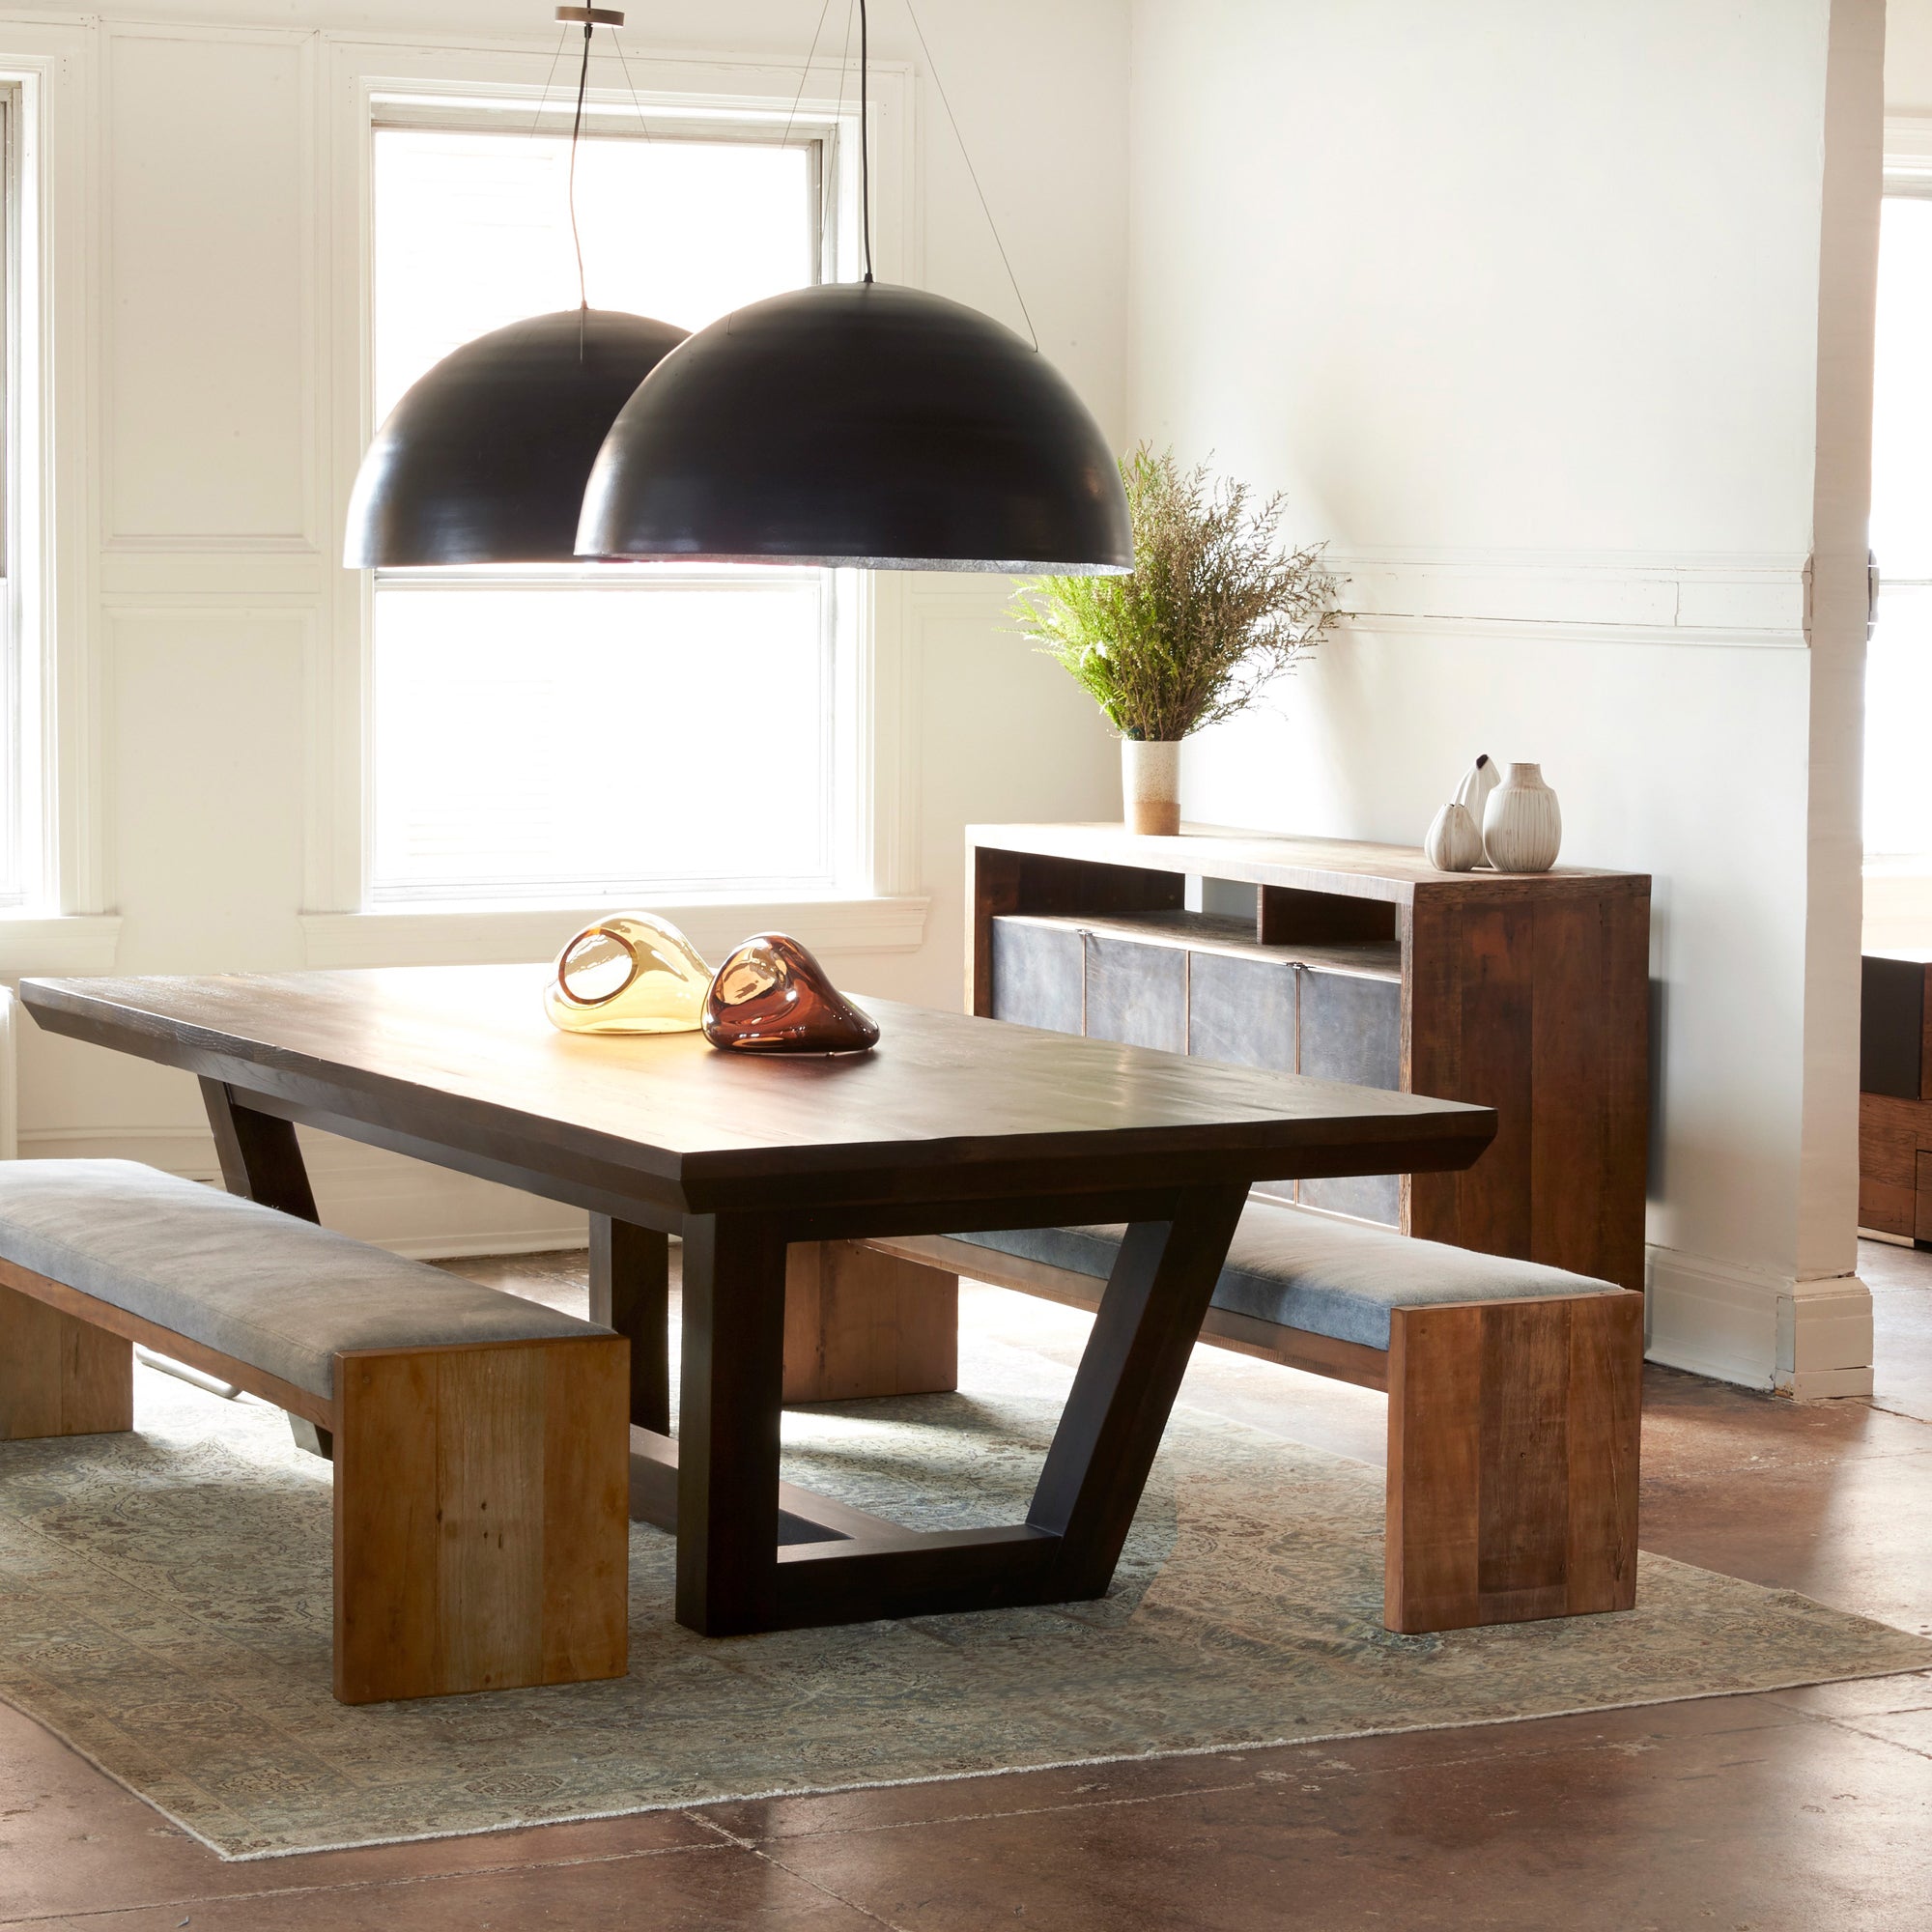  Dining room photo. Rectangular dining table with two upholstered benches on either side as seating. There are two black circular pendants hanging above dining table. The dining set is placed in a white room with a large window, the wall adjacent to the window has a wood credenza against it.  